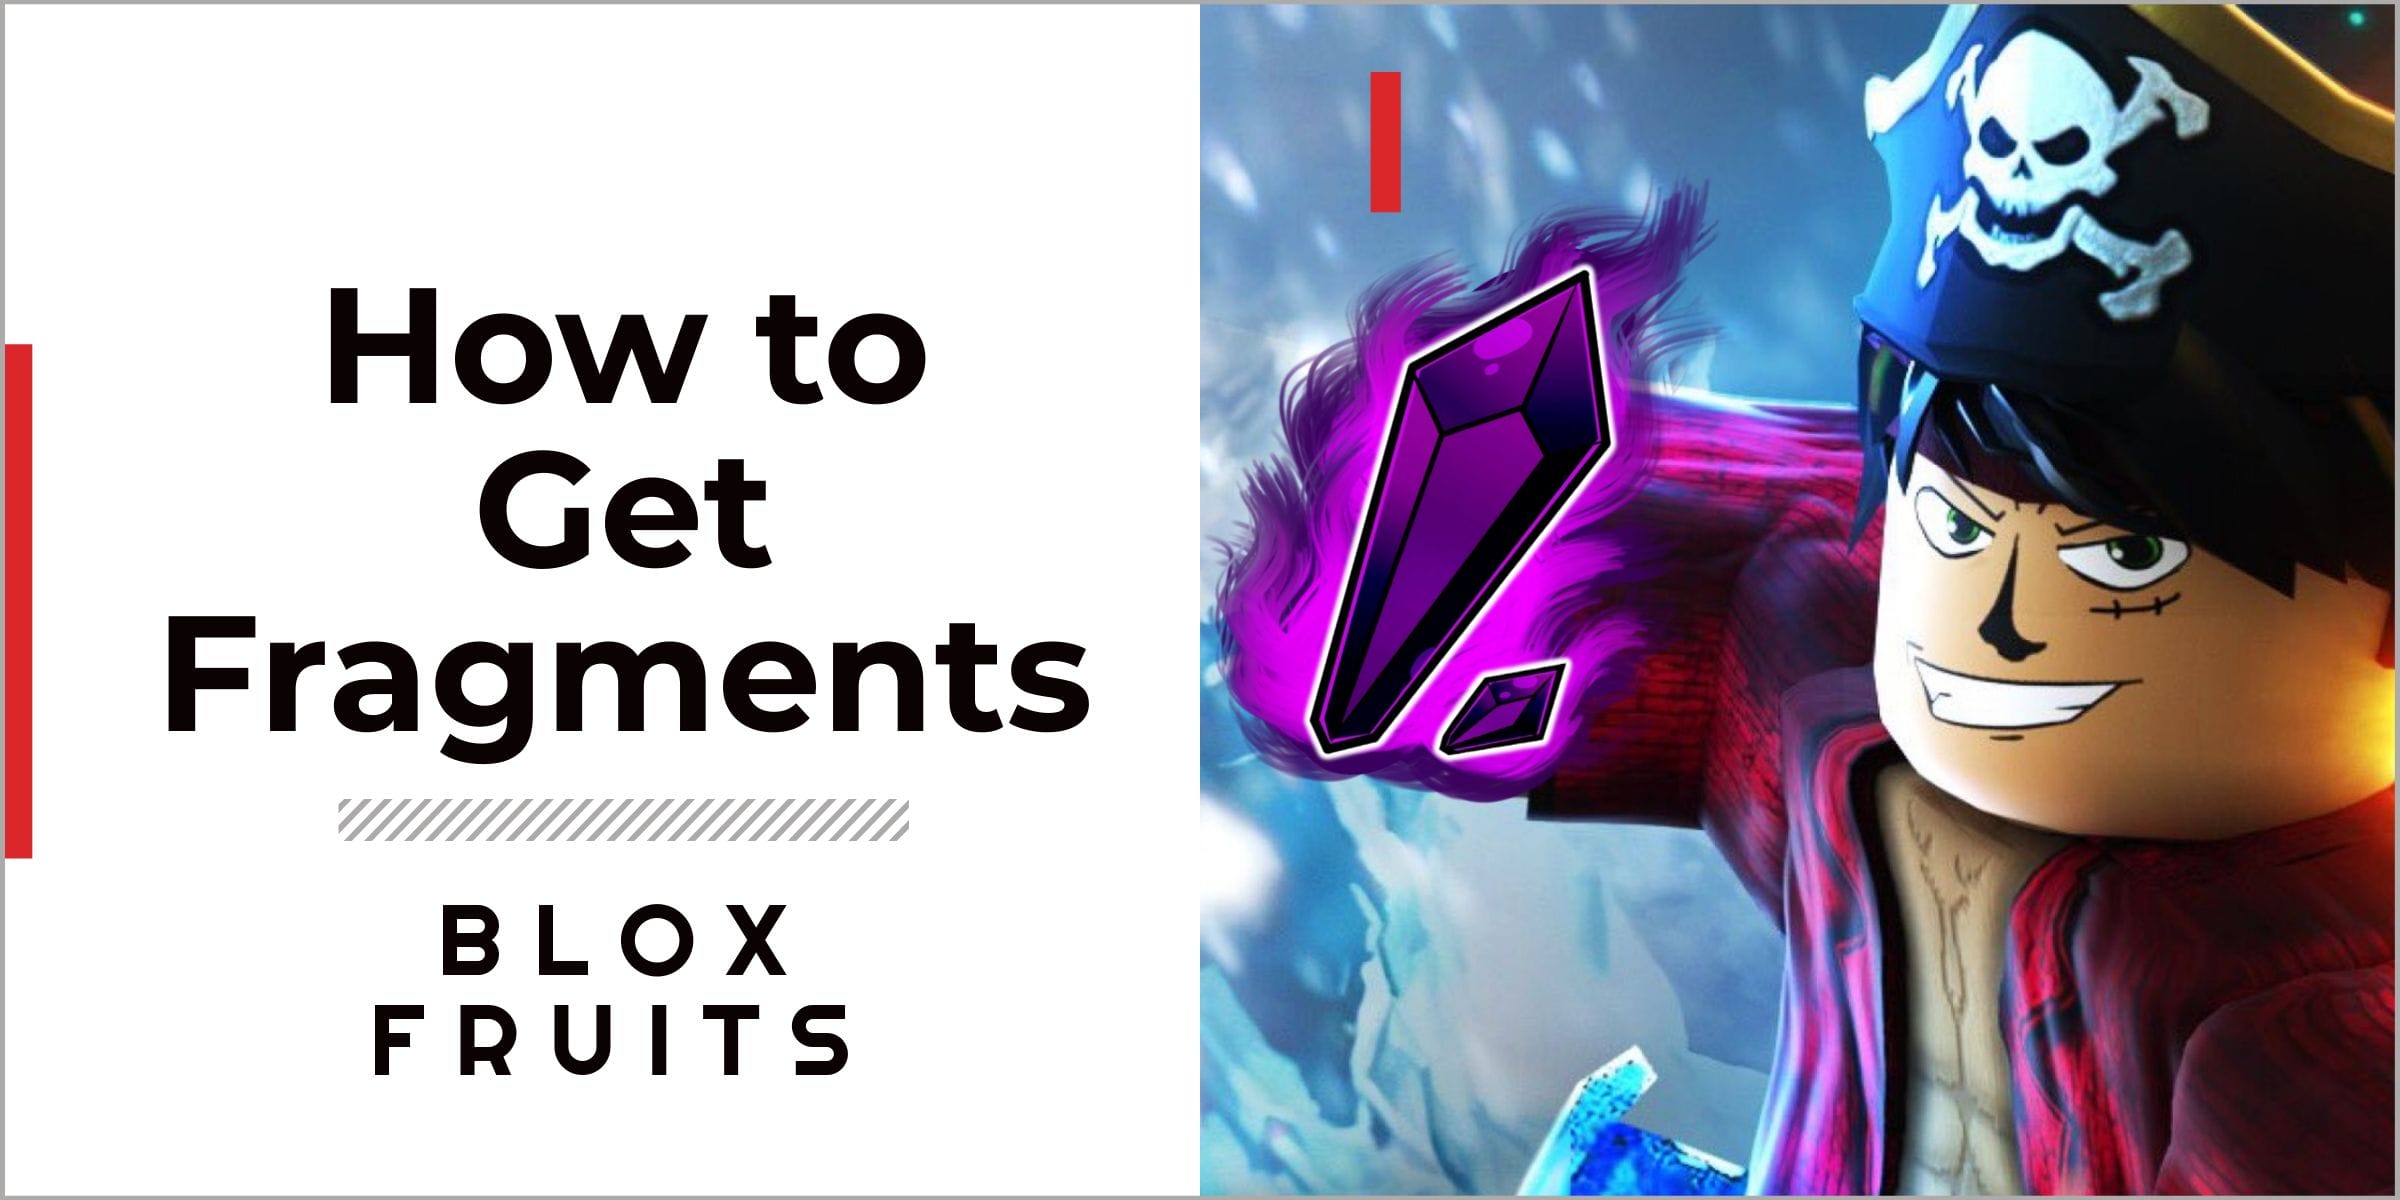 I will host and solo Blox Fruit raids for fragments